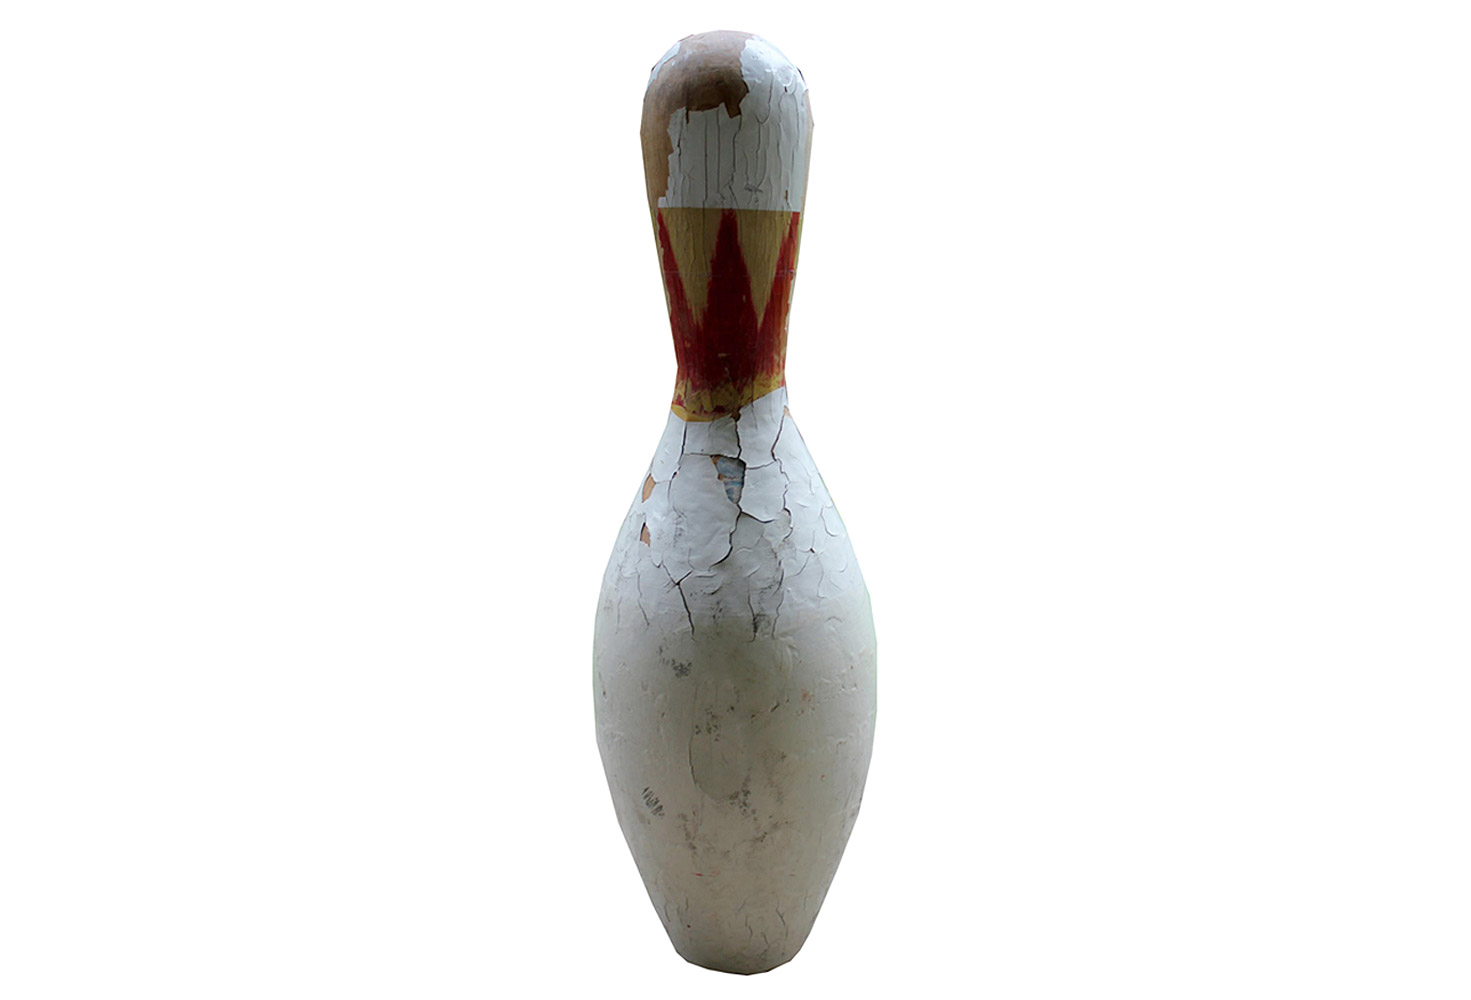 Bowling Pin | Second Shout Out